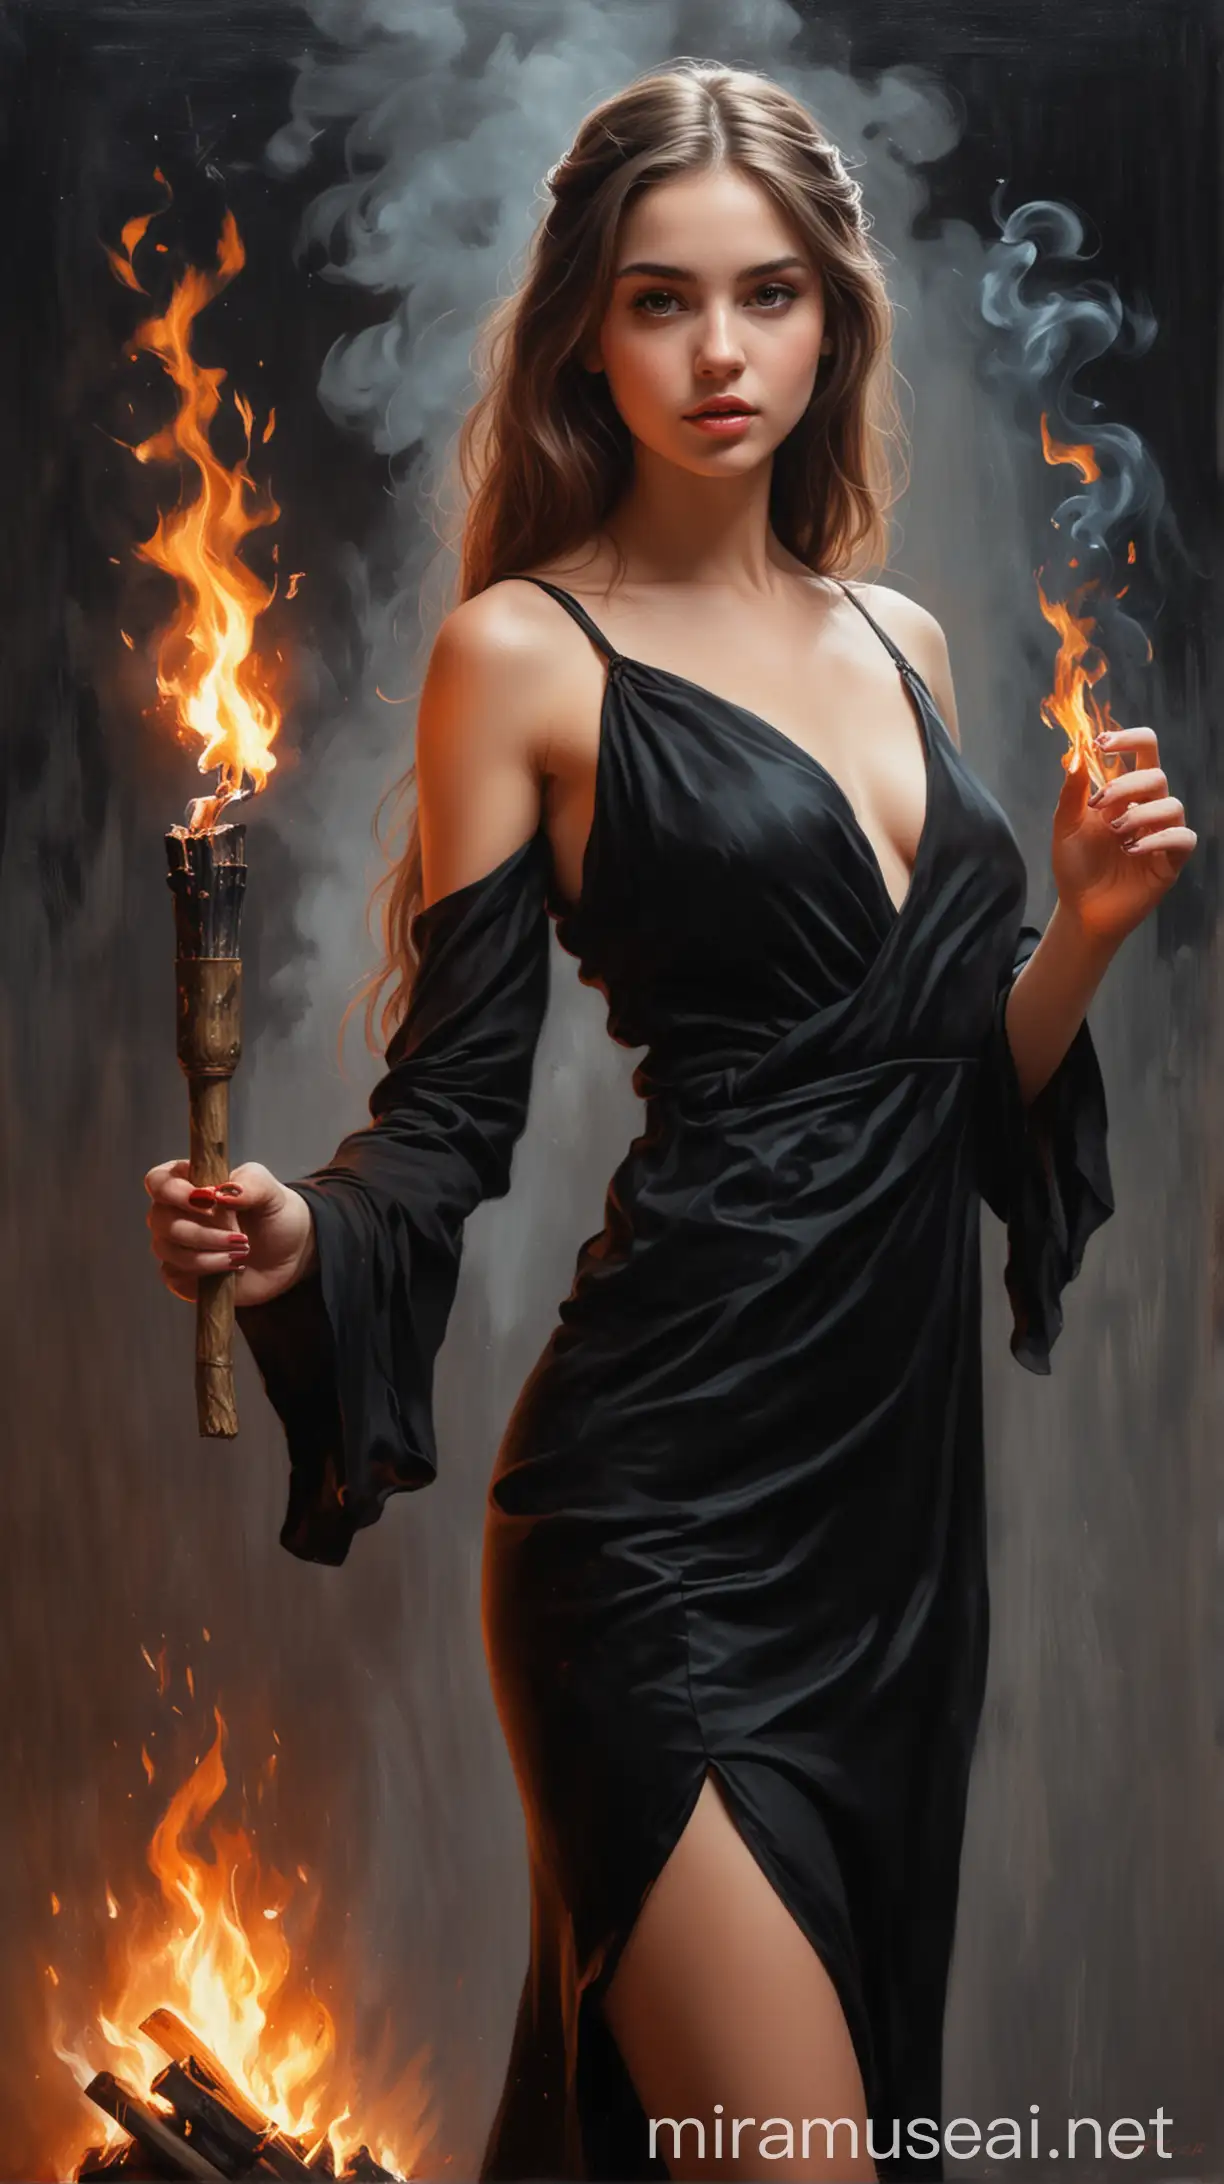 Painting of a seductive young girl in black dress holding fire in her hand